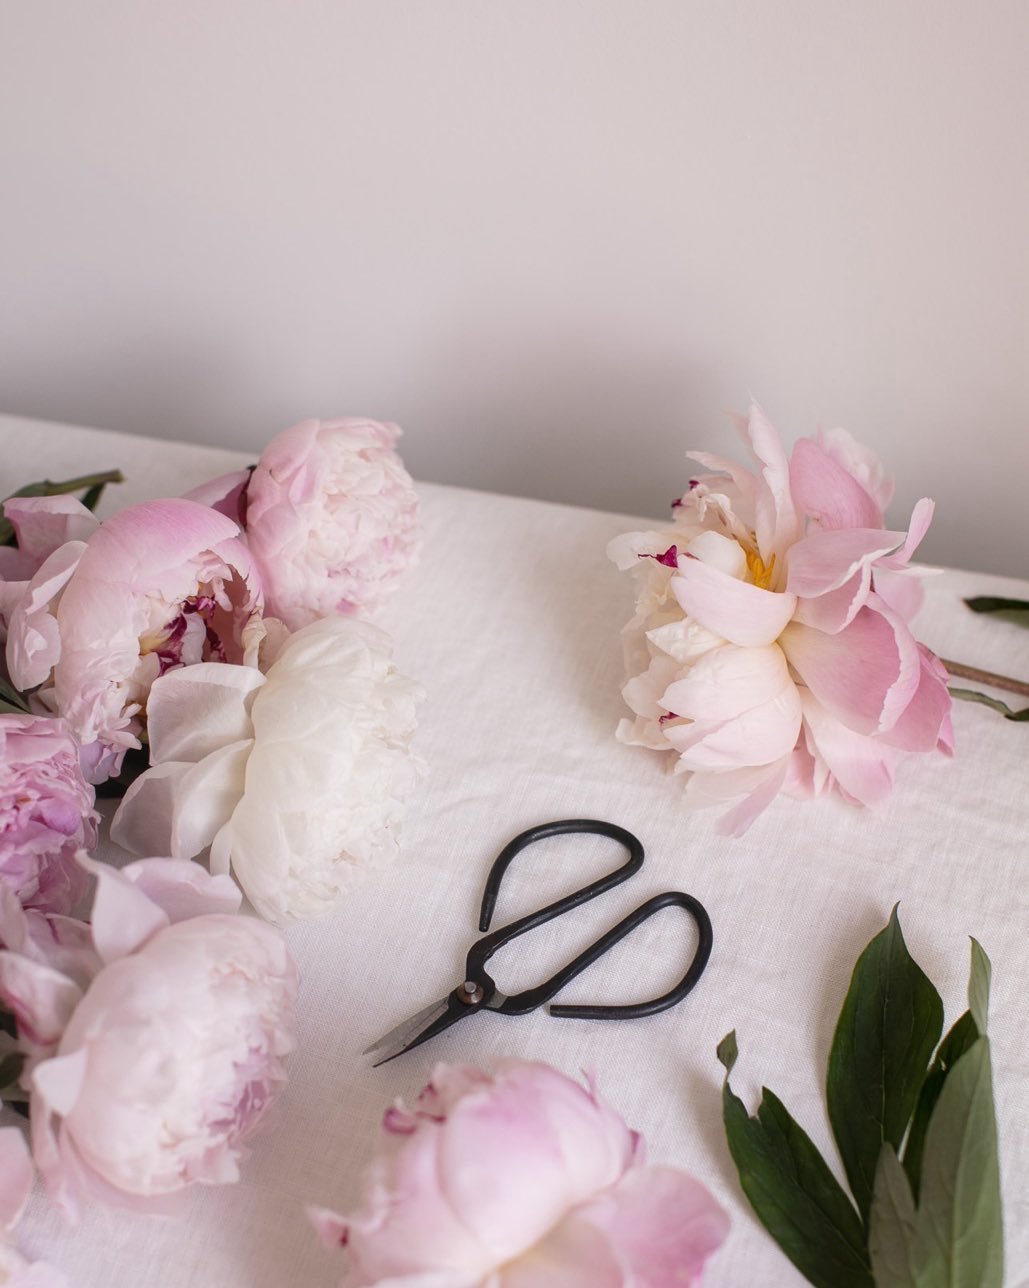 I&rsquo;ve been flowering for myself lately and it&rsquo;s been so fun to try new things and push my comfort levels all while using my favorite blooms. Peonies will always hold my heart

#weddingplanning #weddingcolors #neutralwedding #colorfulweddin